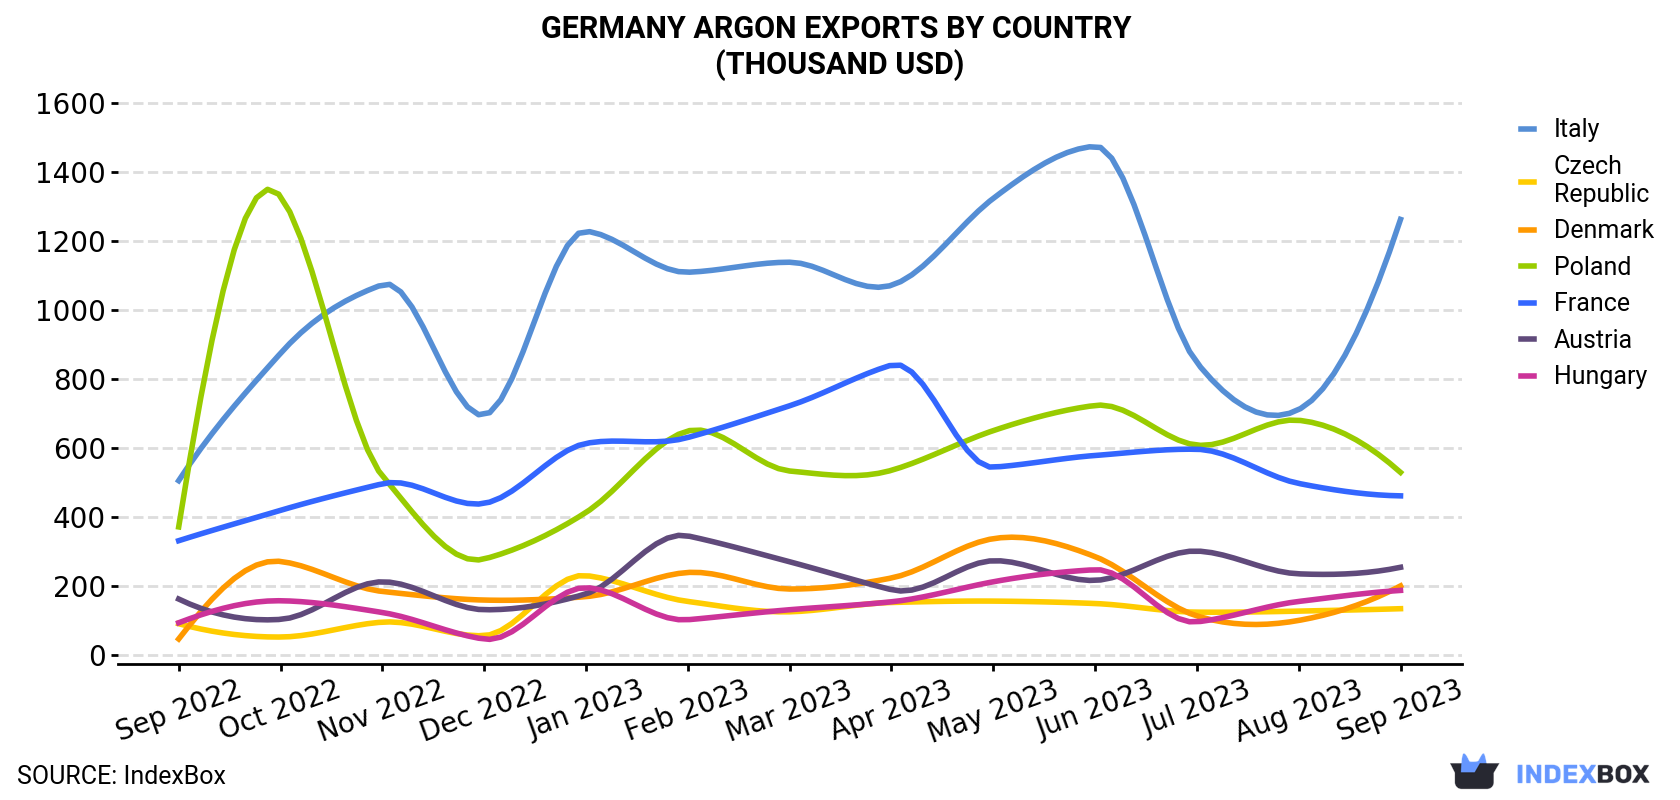 Germany Argon Exports By Country (Thousand USD)